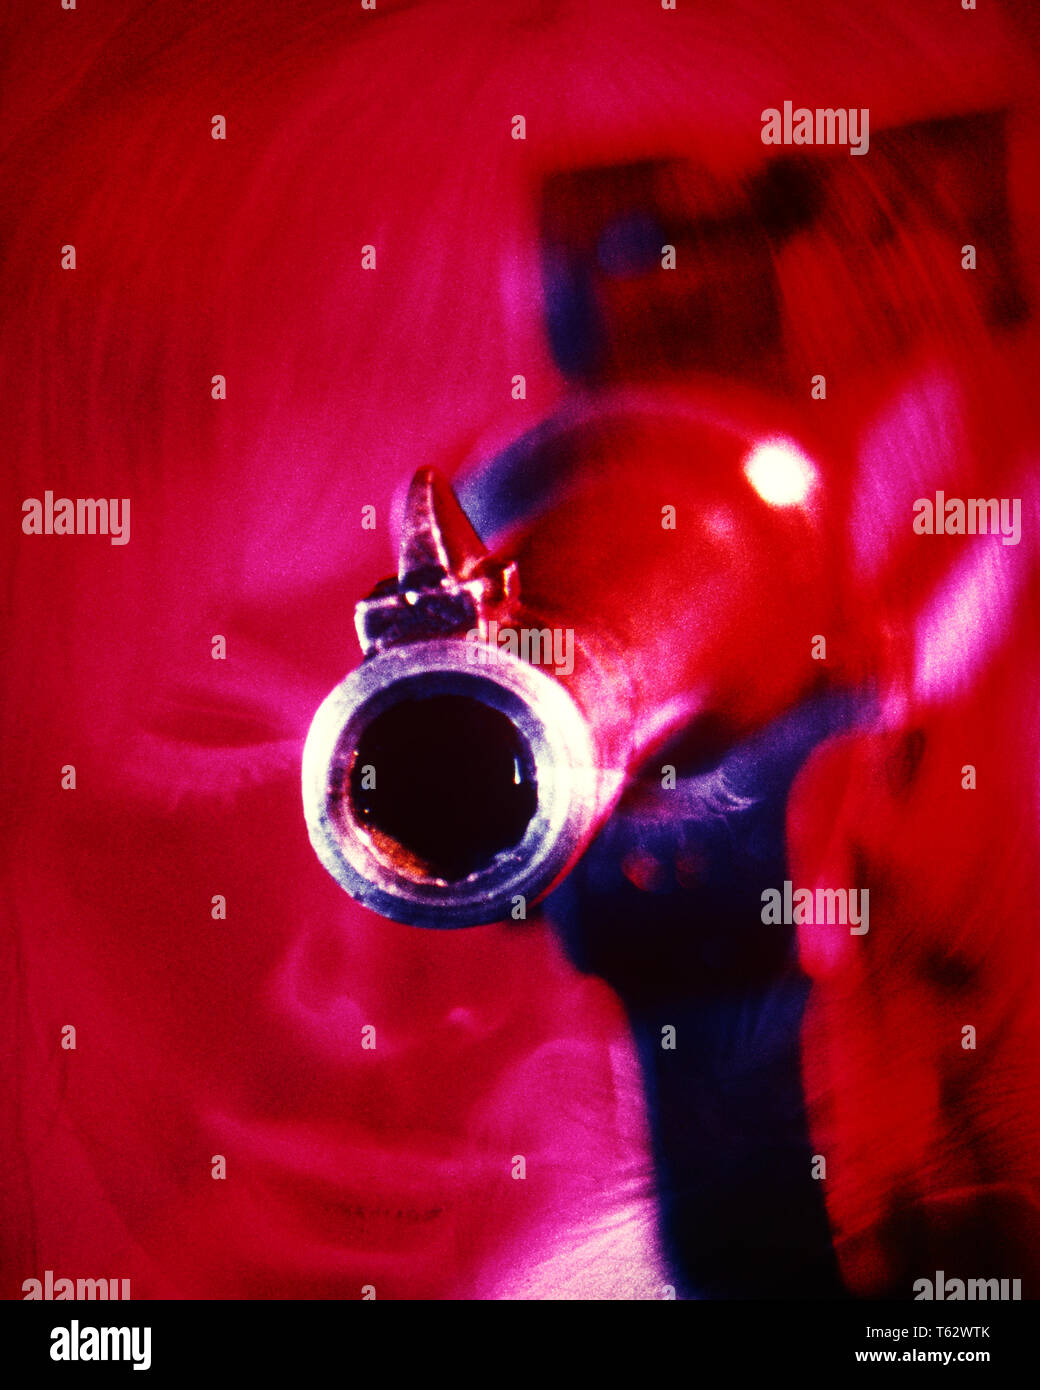 1970s MUZZLE OF GERMAN LUGER AUTOMATIC PISTOL GUN POINTED AT THE CAMERA RED OVERLAY OF WOMAN’S FACE DANGER  - kg5895 PHT001 HARS SYMBOLS WOMAN'S DANGEROUS DEATH AUTOMATIC POWERFUL POINTED AT OF THE HOLDUP SPIES CONCEPT CONCEPTUAL MUZZLE STILL LIFE CLOSE-UP ESCAPE OVERLAY VIEWER SYMBOLIC CONCEPTS FIREARM FIREARMS GRAPHIC DESIGN LUGER MAYHEM MURDER PISTOL SEMIAUTOMATIC THREAT THREATENING TONE ASSAULT OLD FASHIONED REPRESENTATION Stock Photo